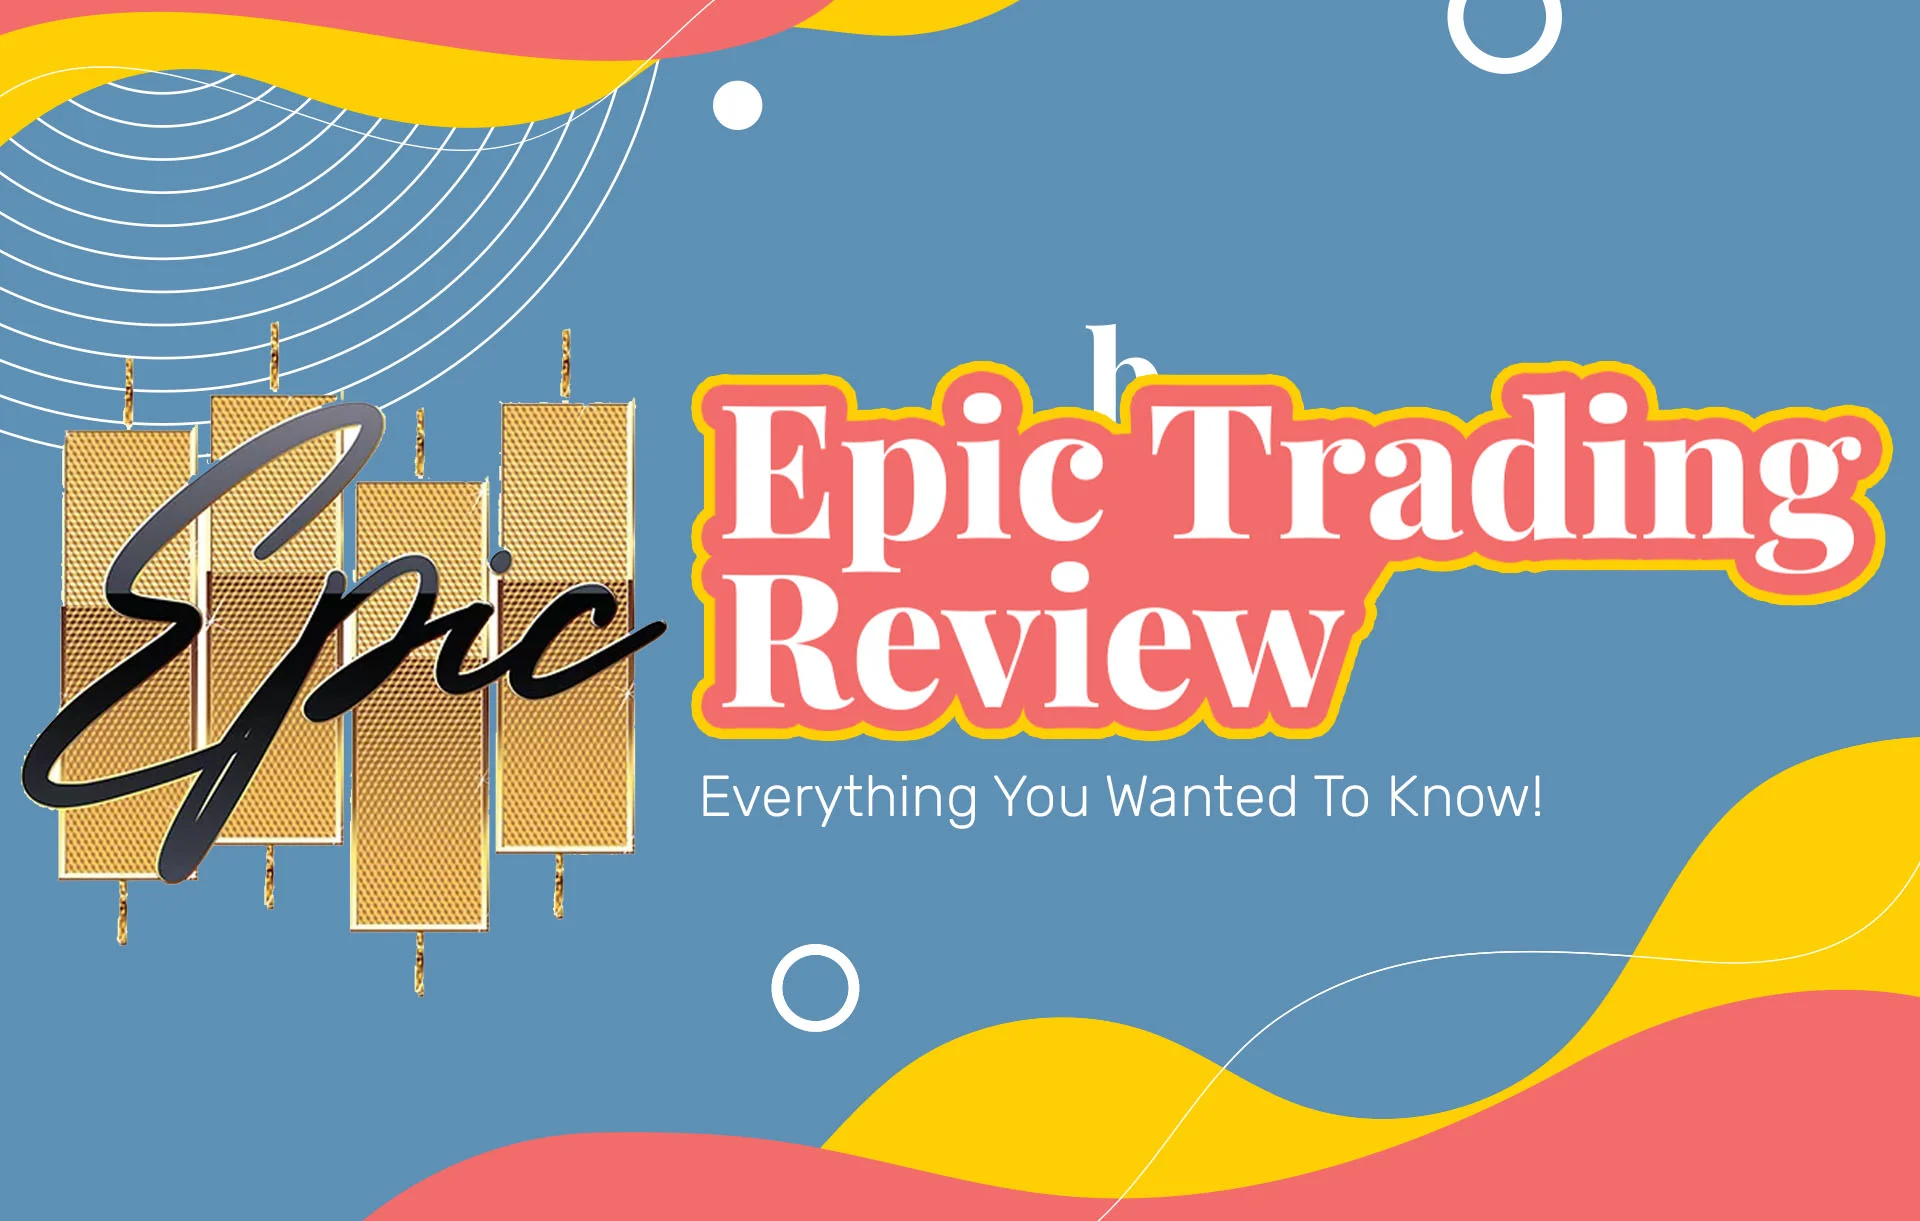 Epic Trading Reviews: Best MLM Company?